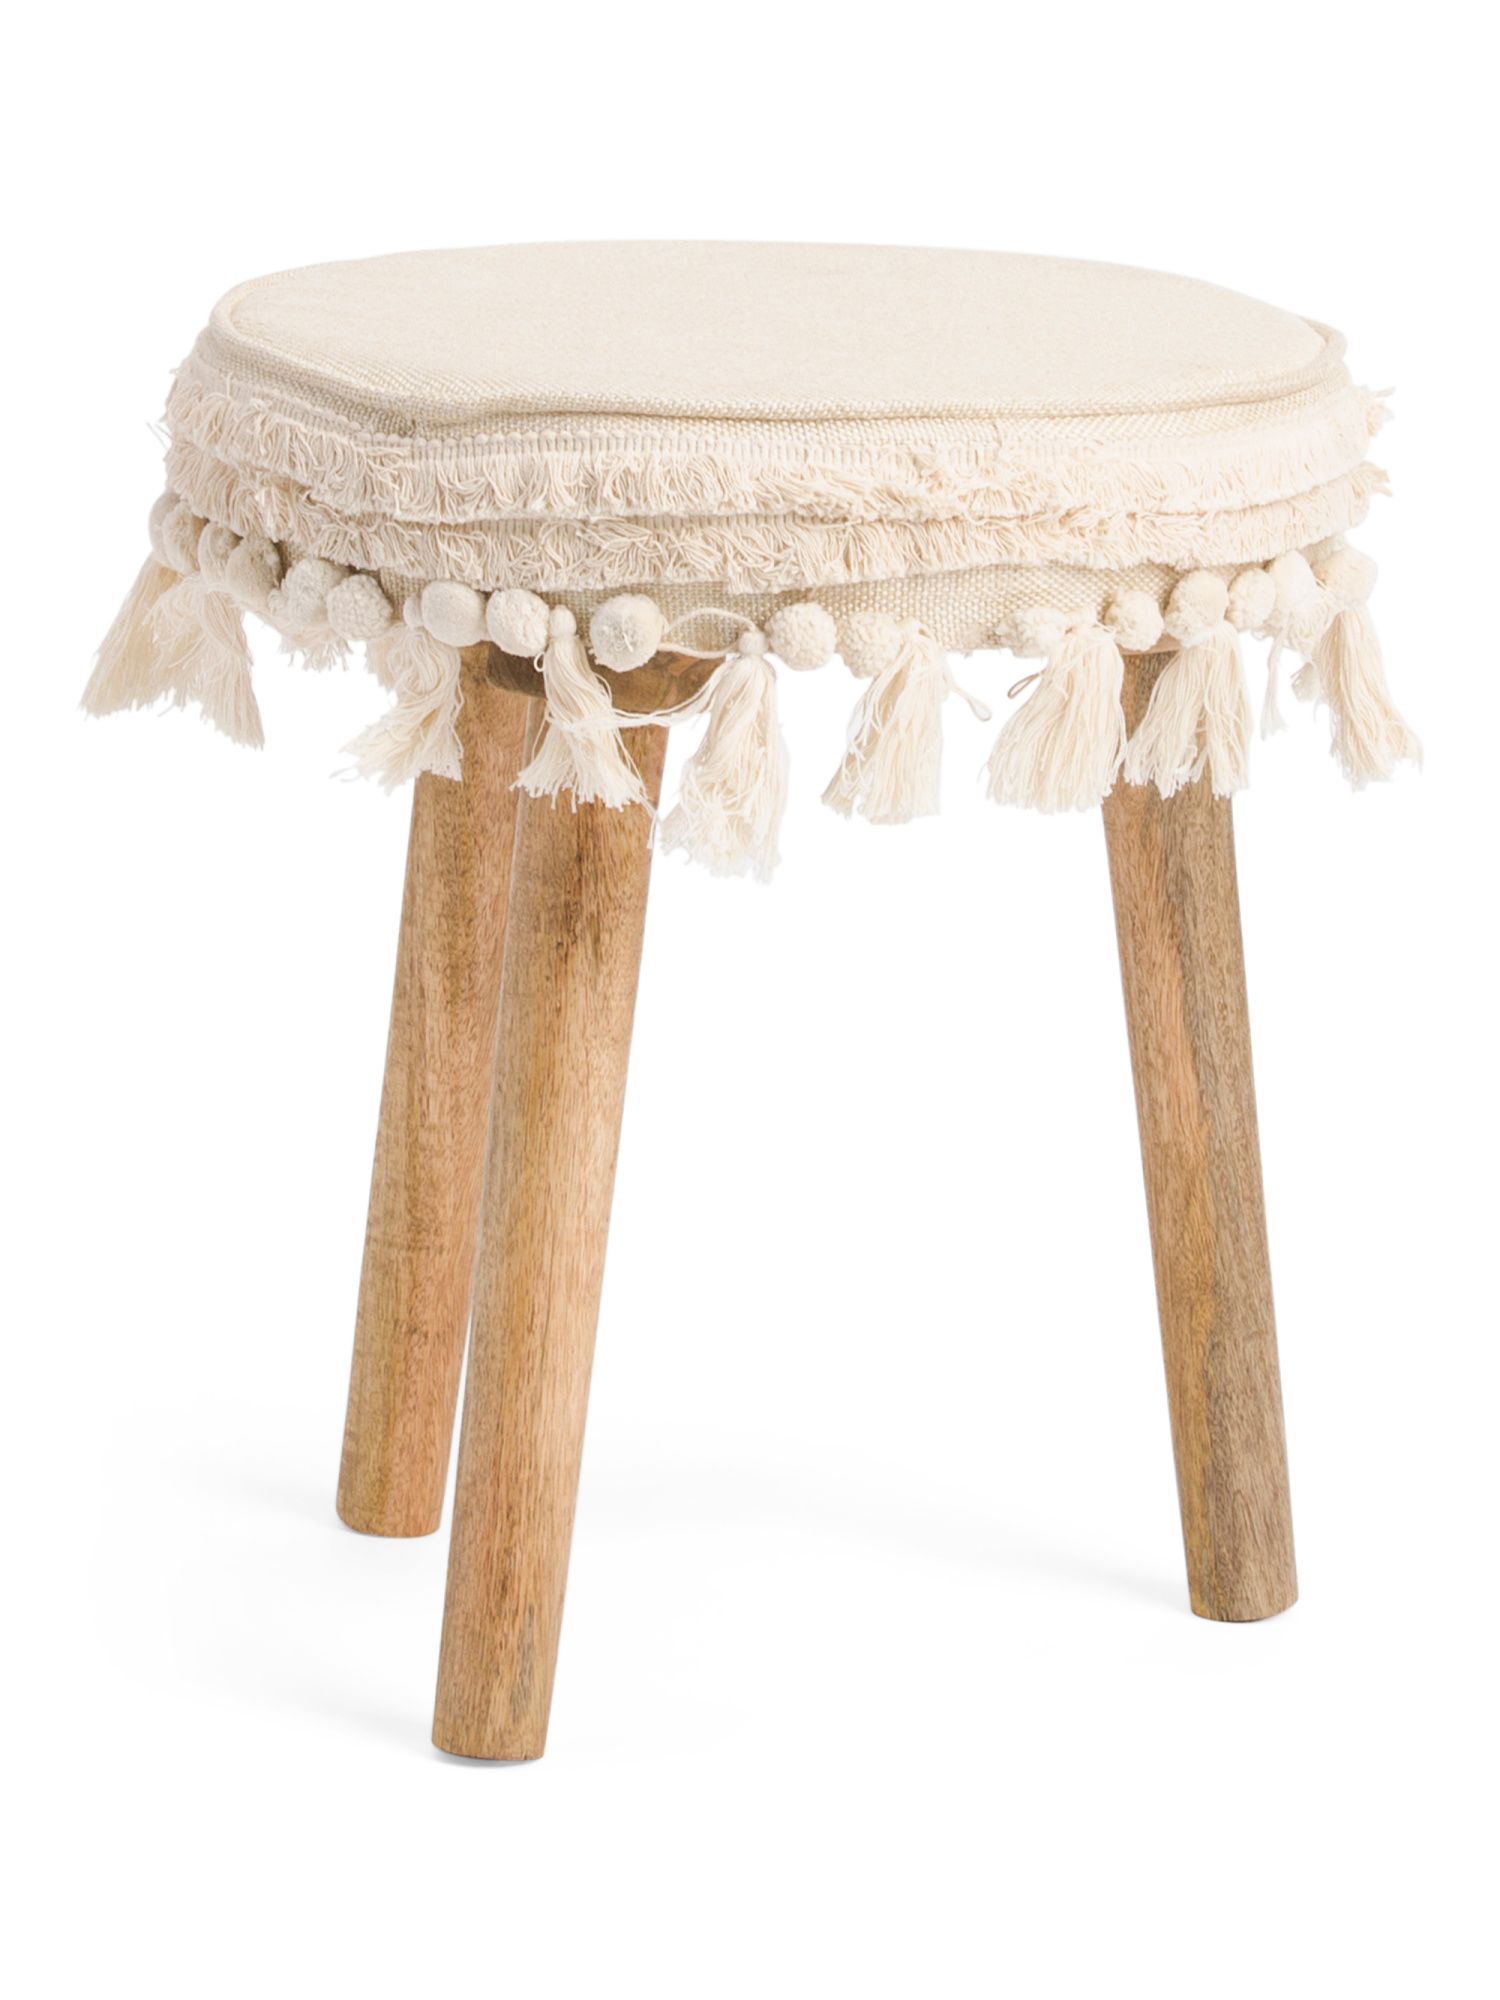 Made In India Stool With Tassels | TJ Maxx